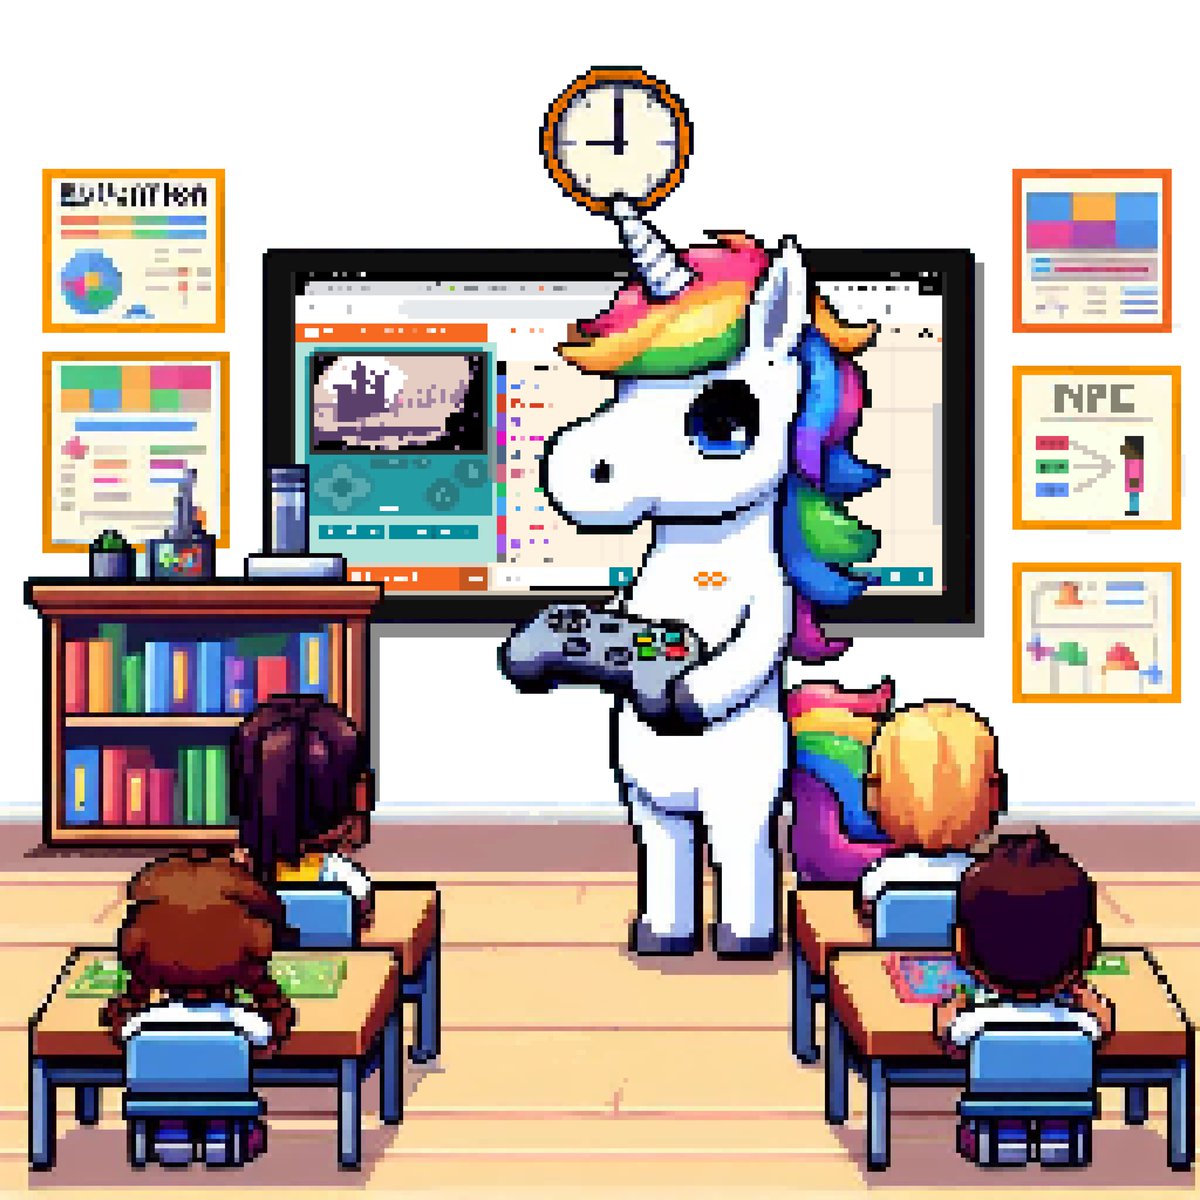 I’m #Hiring for another role! Learning Program Specialist I’m looking for a(nother) Unicorn 🦄 to join my team in a global role, creating and deploying unique learning programs in game development. Check it out here: linkedin.com/jobs/view/3785… #PlayMatters #Unicorn #Jobs